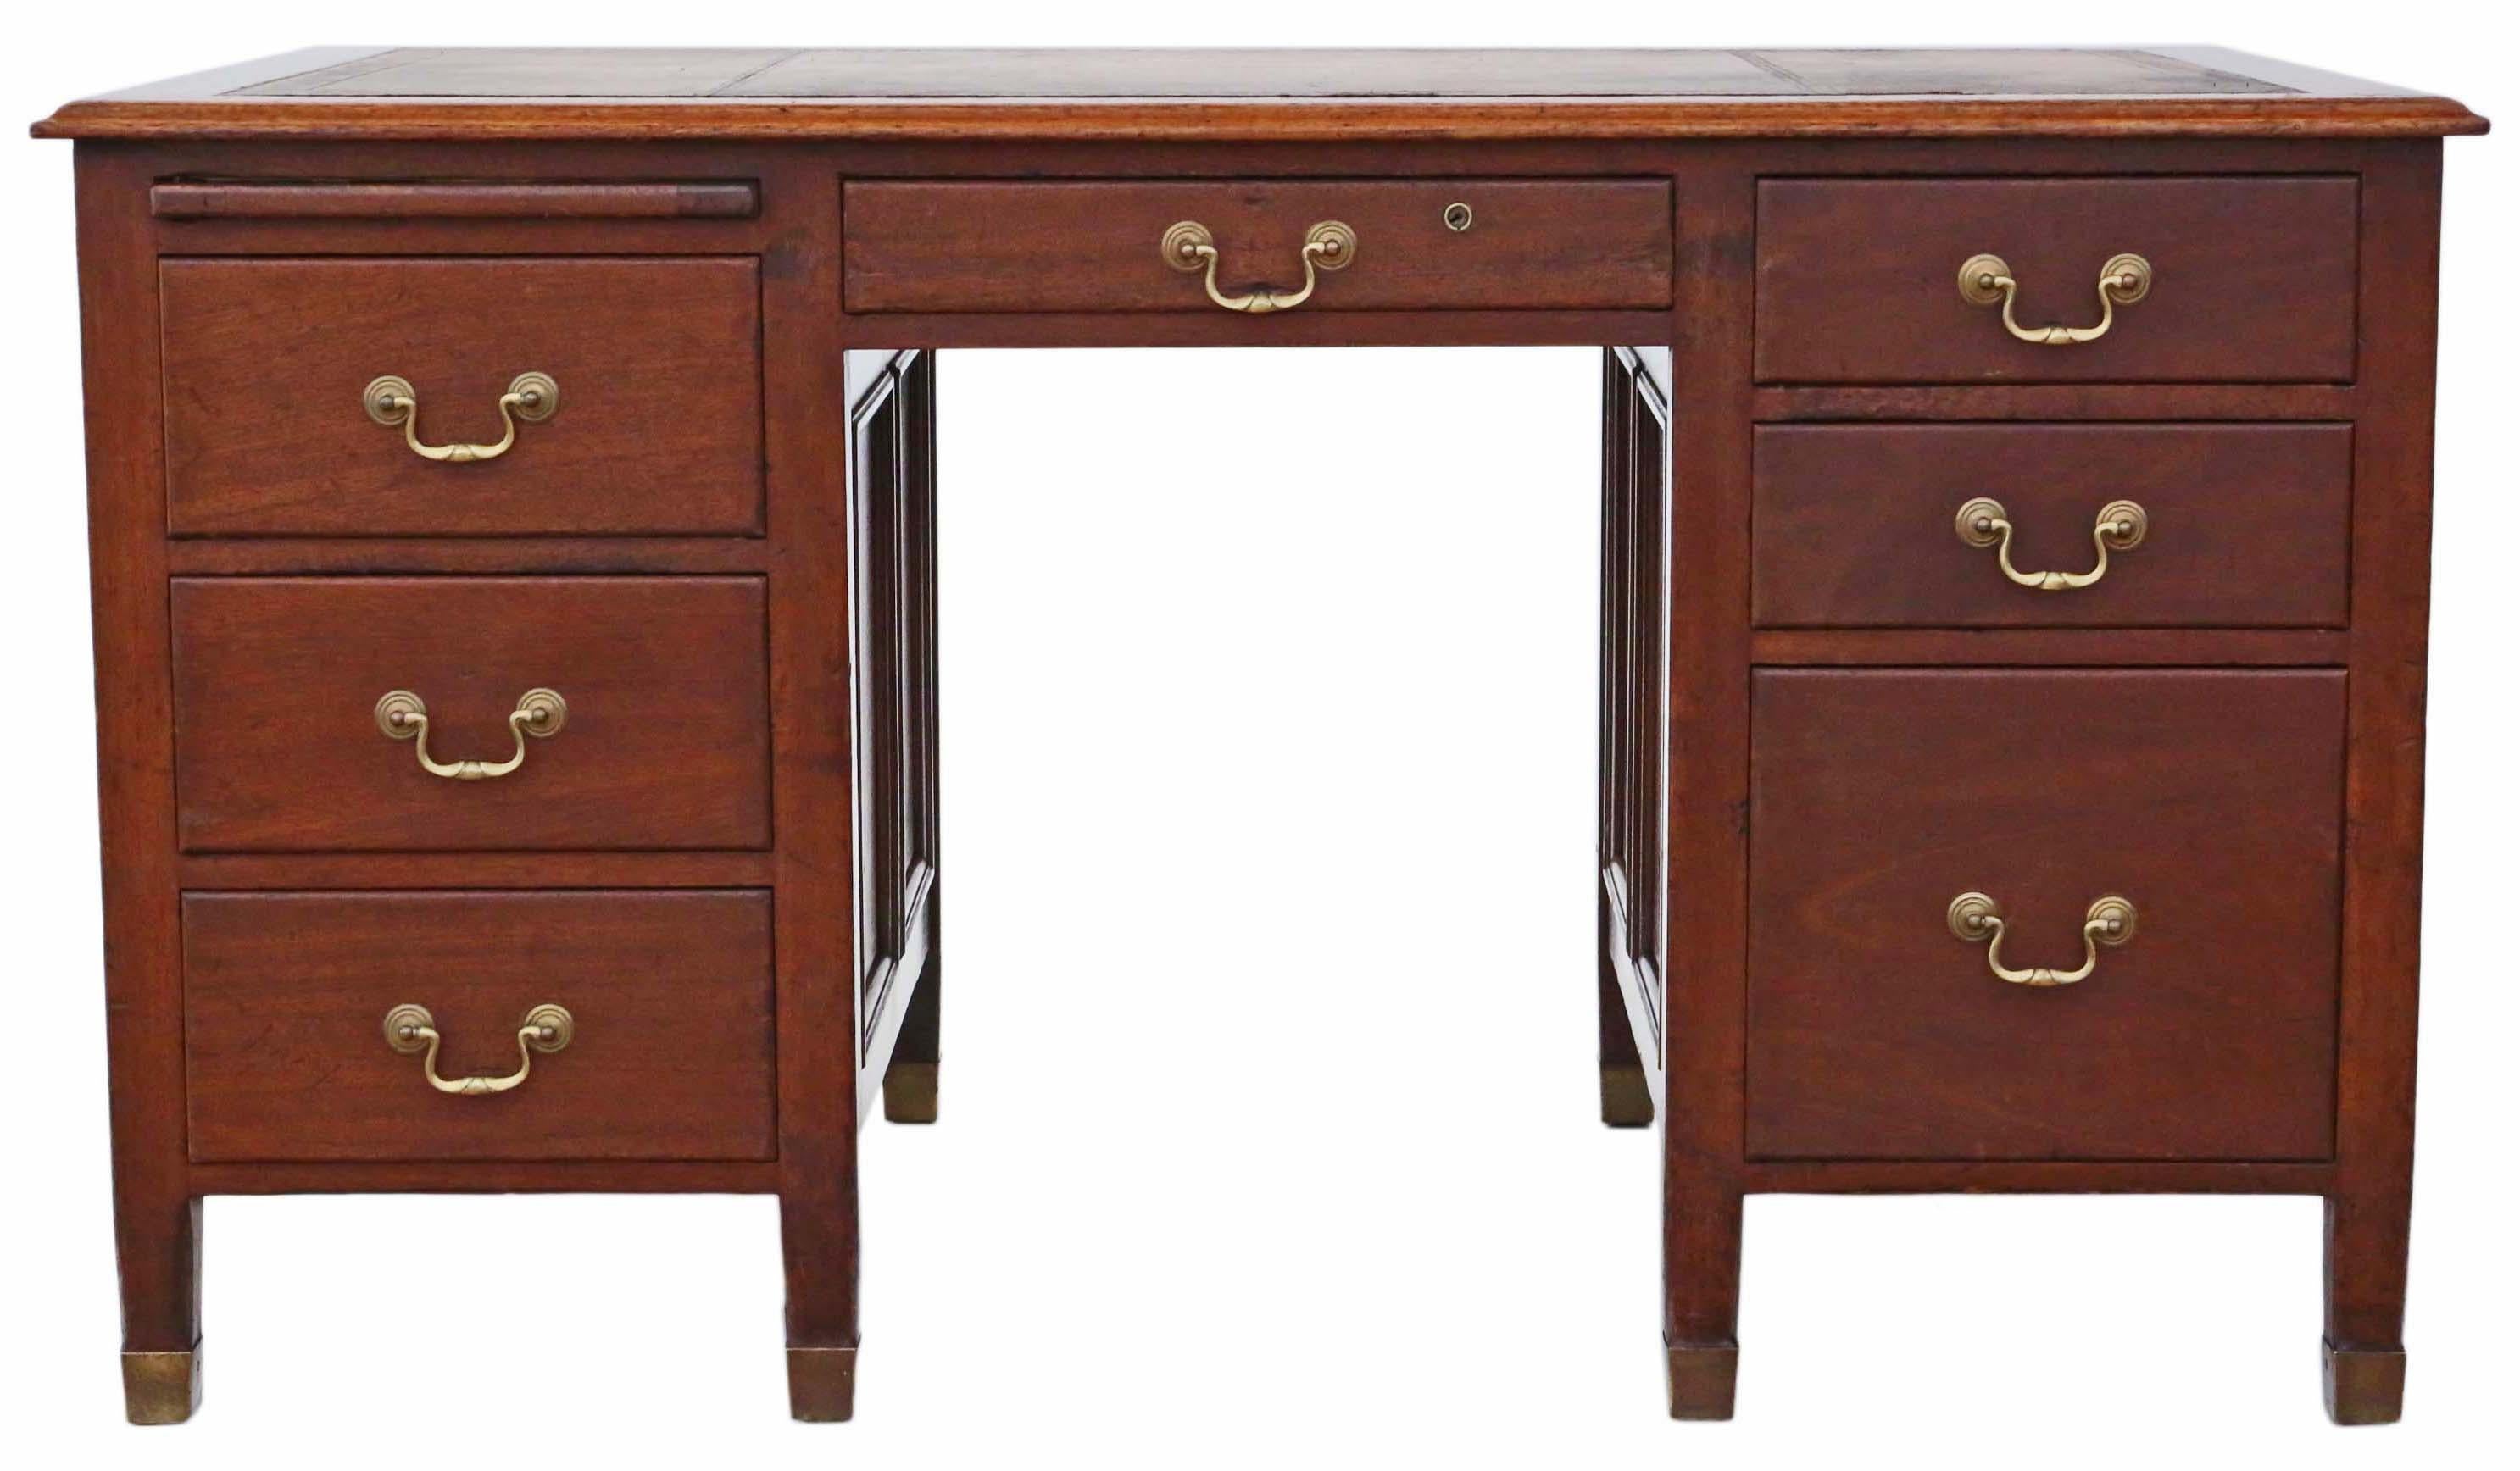 Antique mahogany twin-pedestal partner's desk of exceptional quality.

The desk boasts fantastic proportions, a rich color, and a well-developed patina. Remarkably, there is no evidence of woodworm.

This one-piece desk features a delightful,